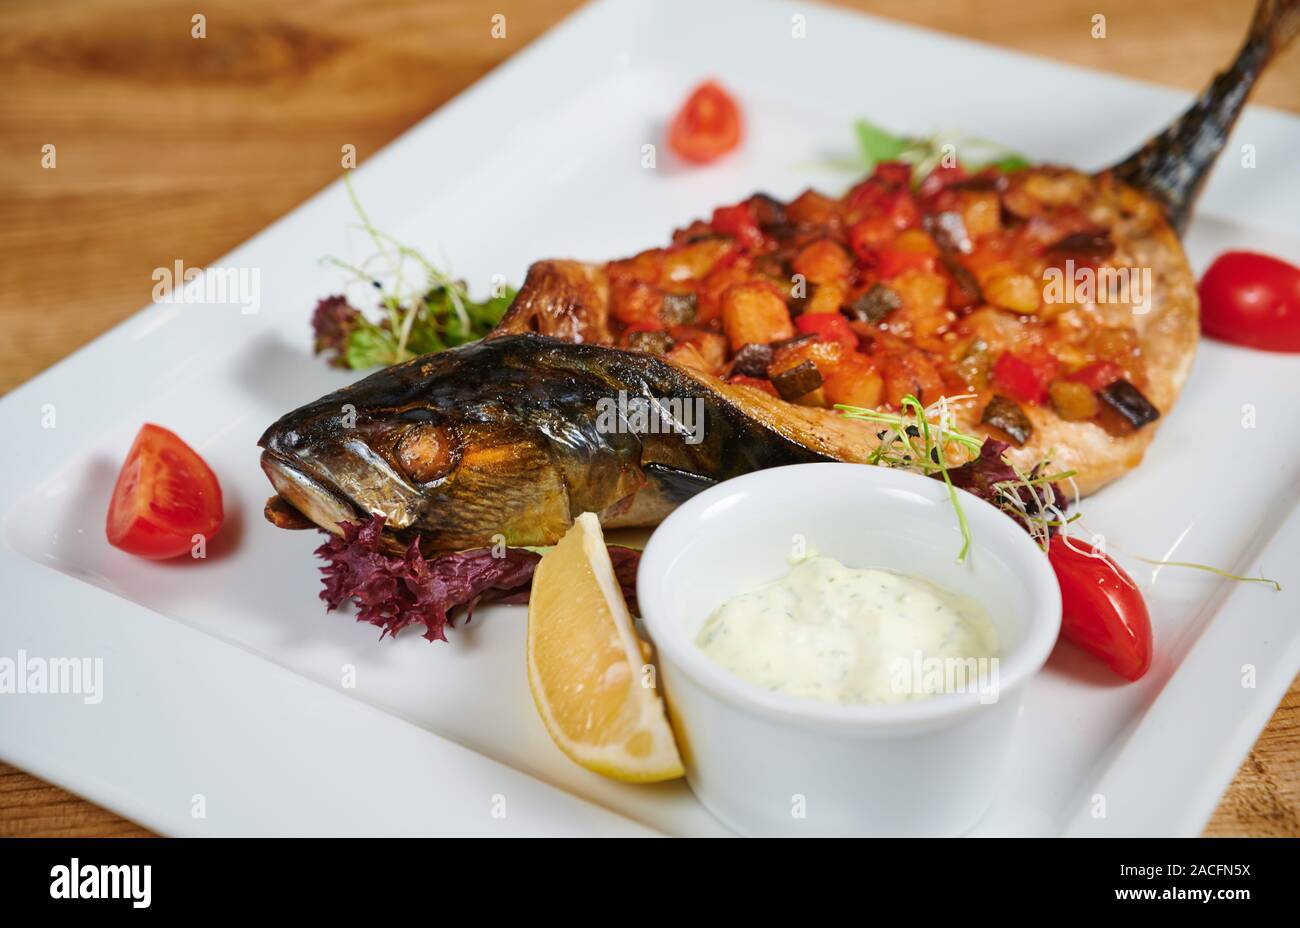 Grilled fish stuffed with different vegetables Stock Photo